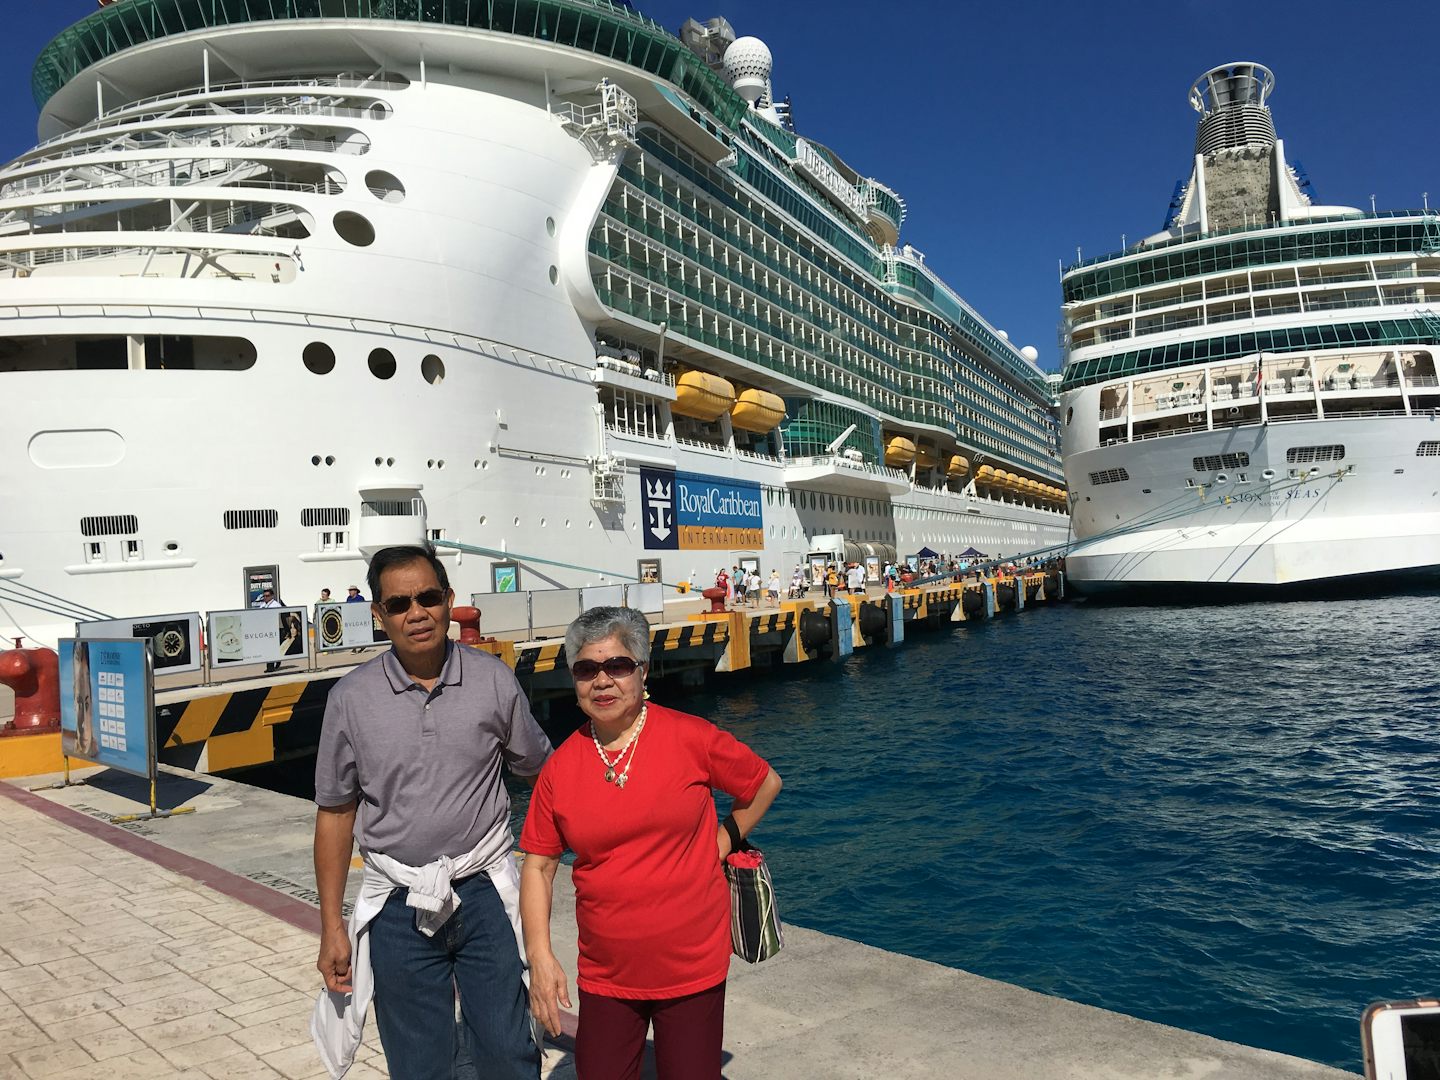 At Cozumel with our ship on the background